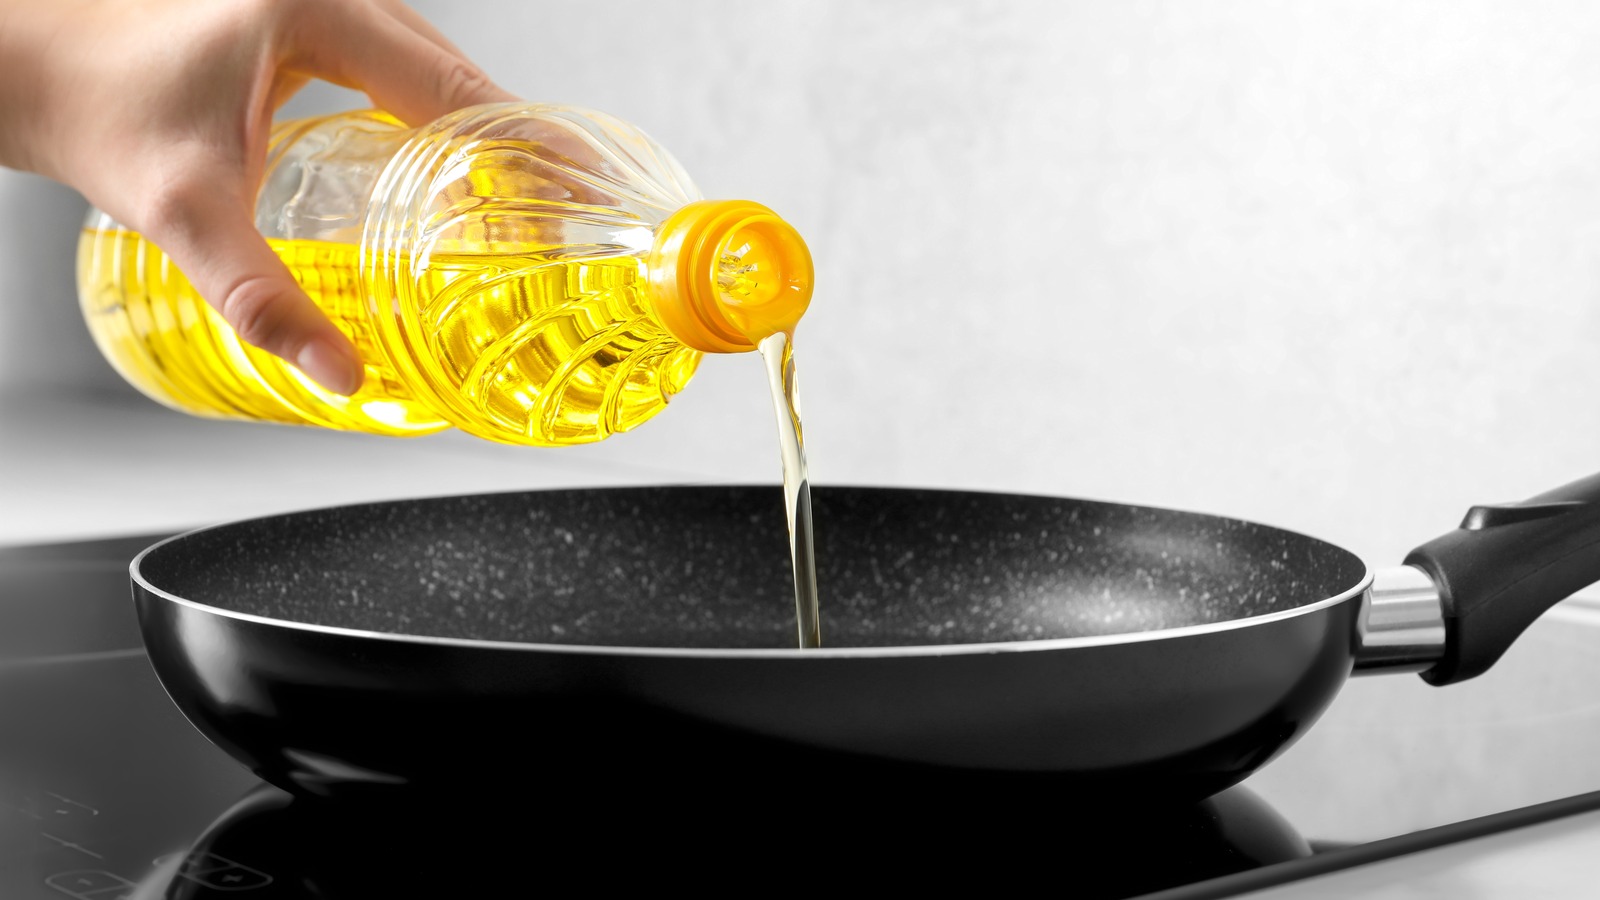 What You Should Do With Your Used Cooking Oil (Instead Of Tossing It Out)